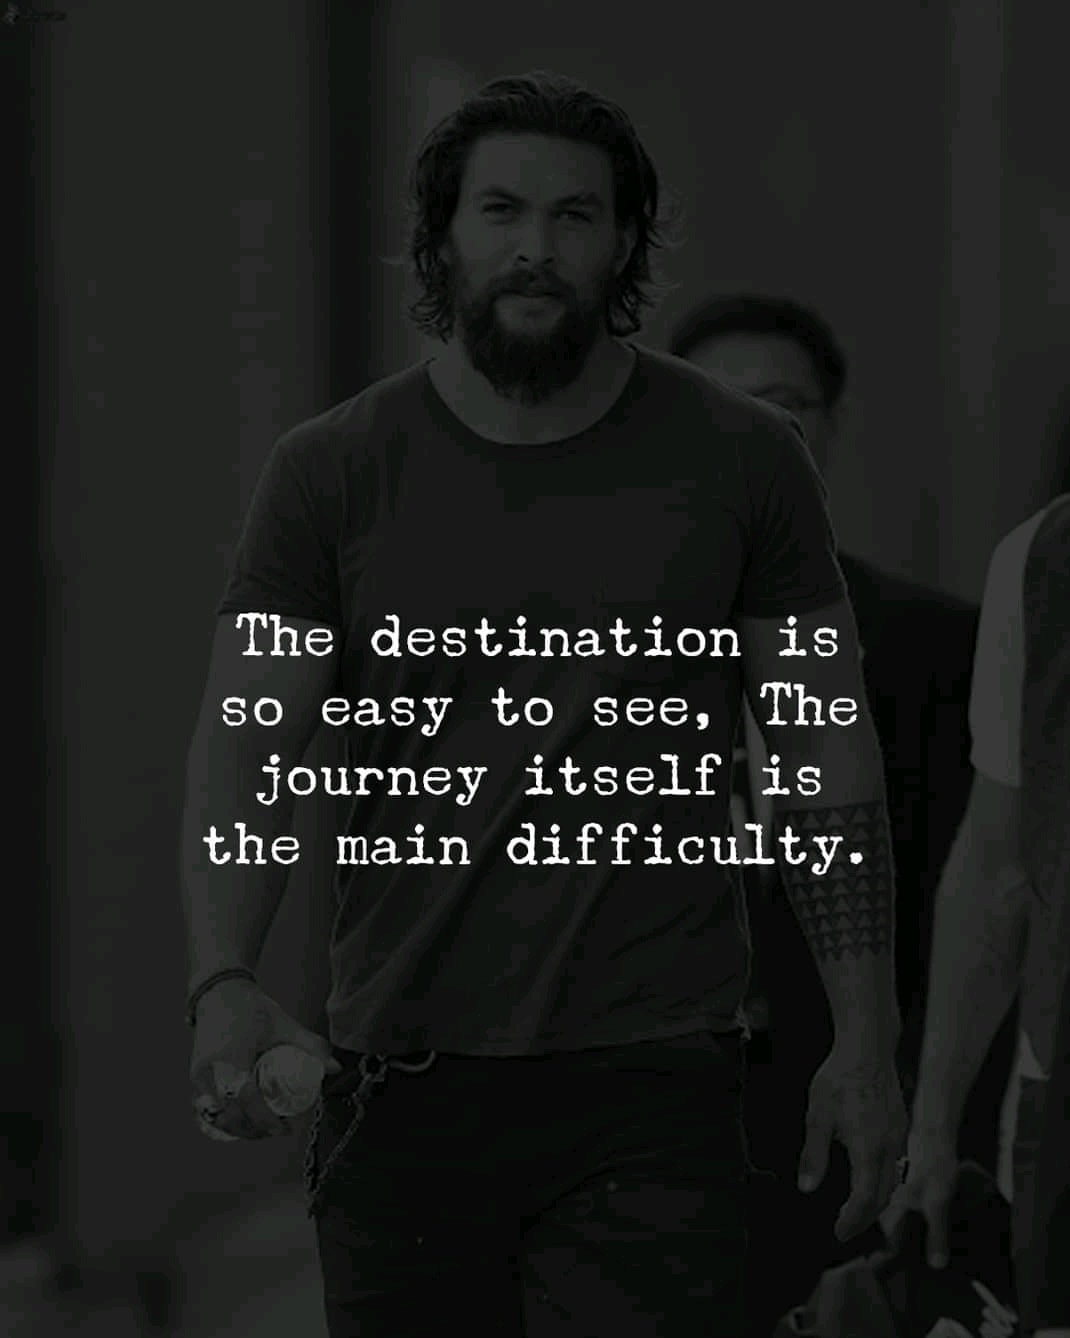 The destination is so easy to see, The journey itself is the main difficulty